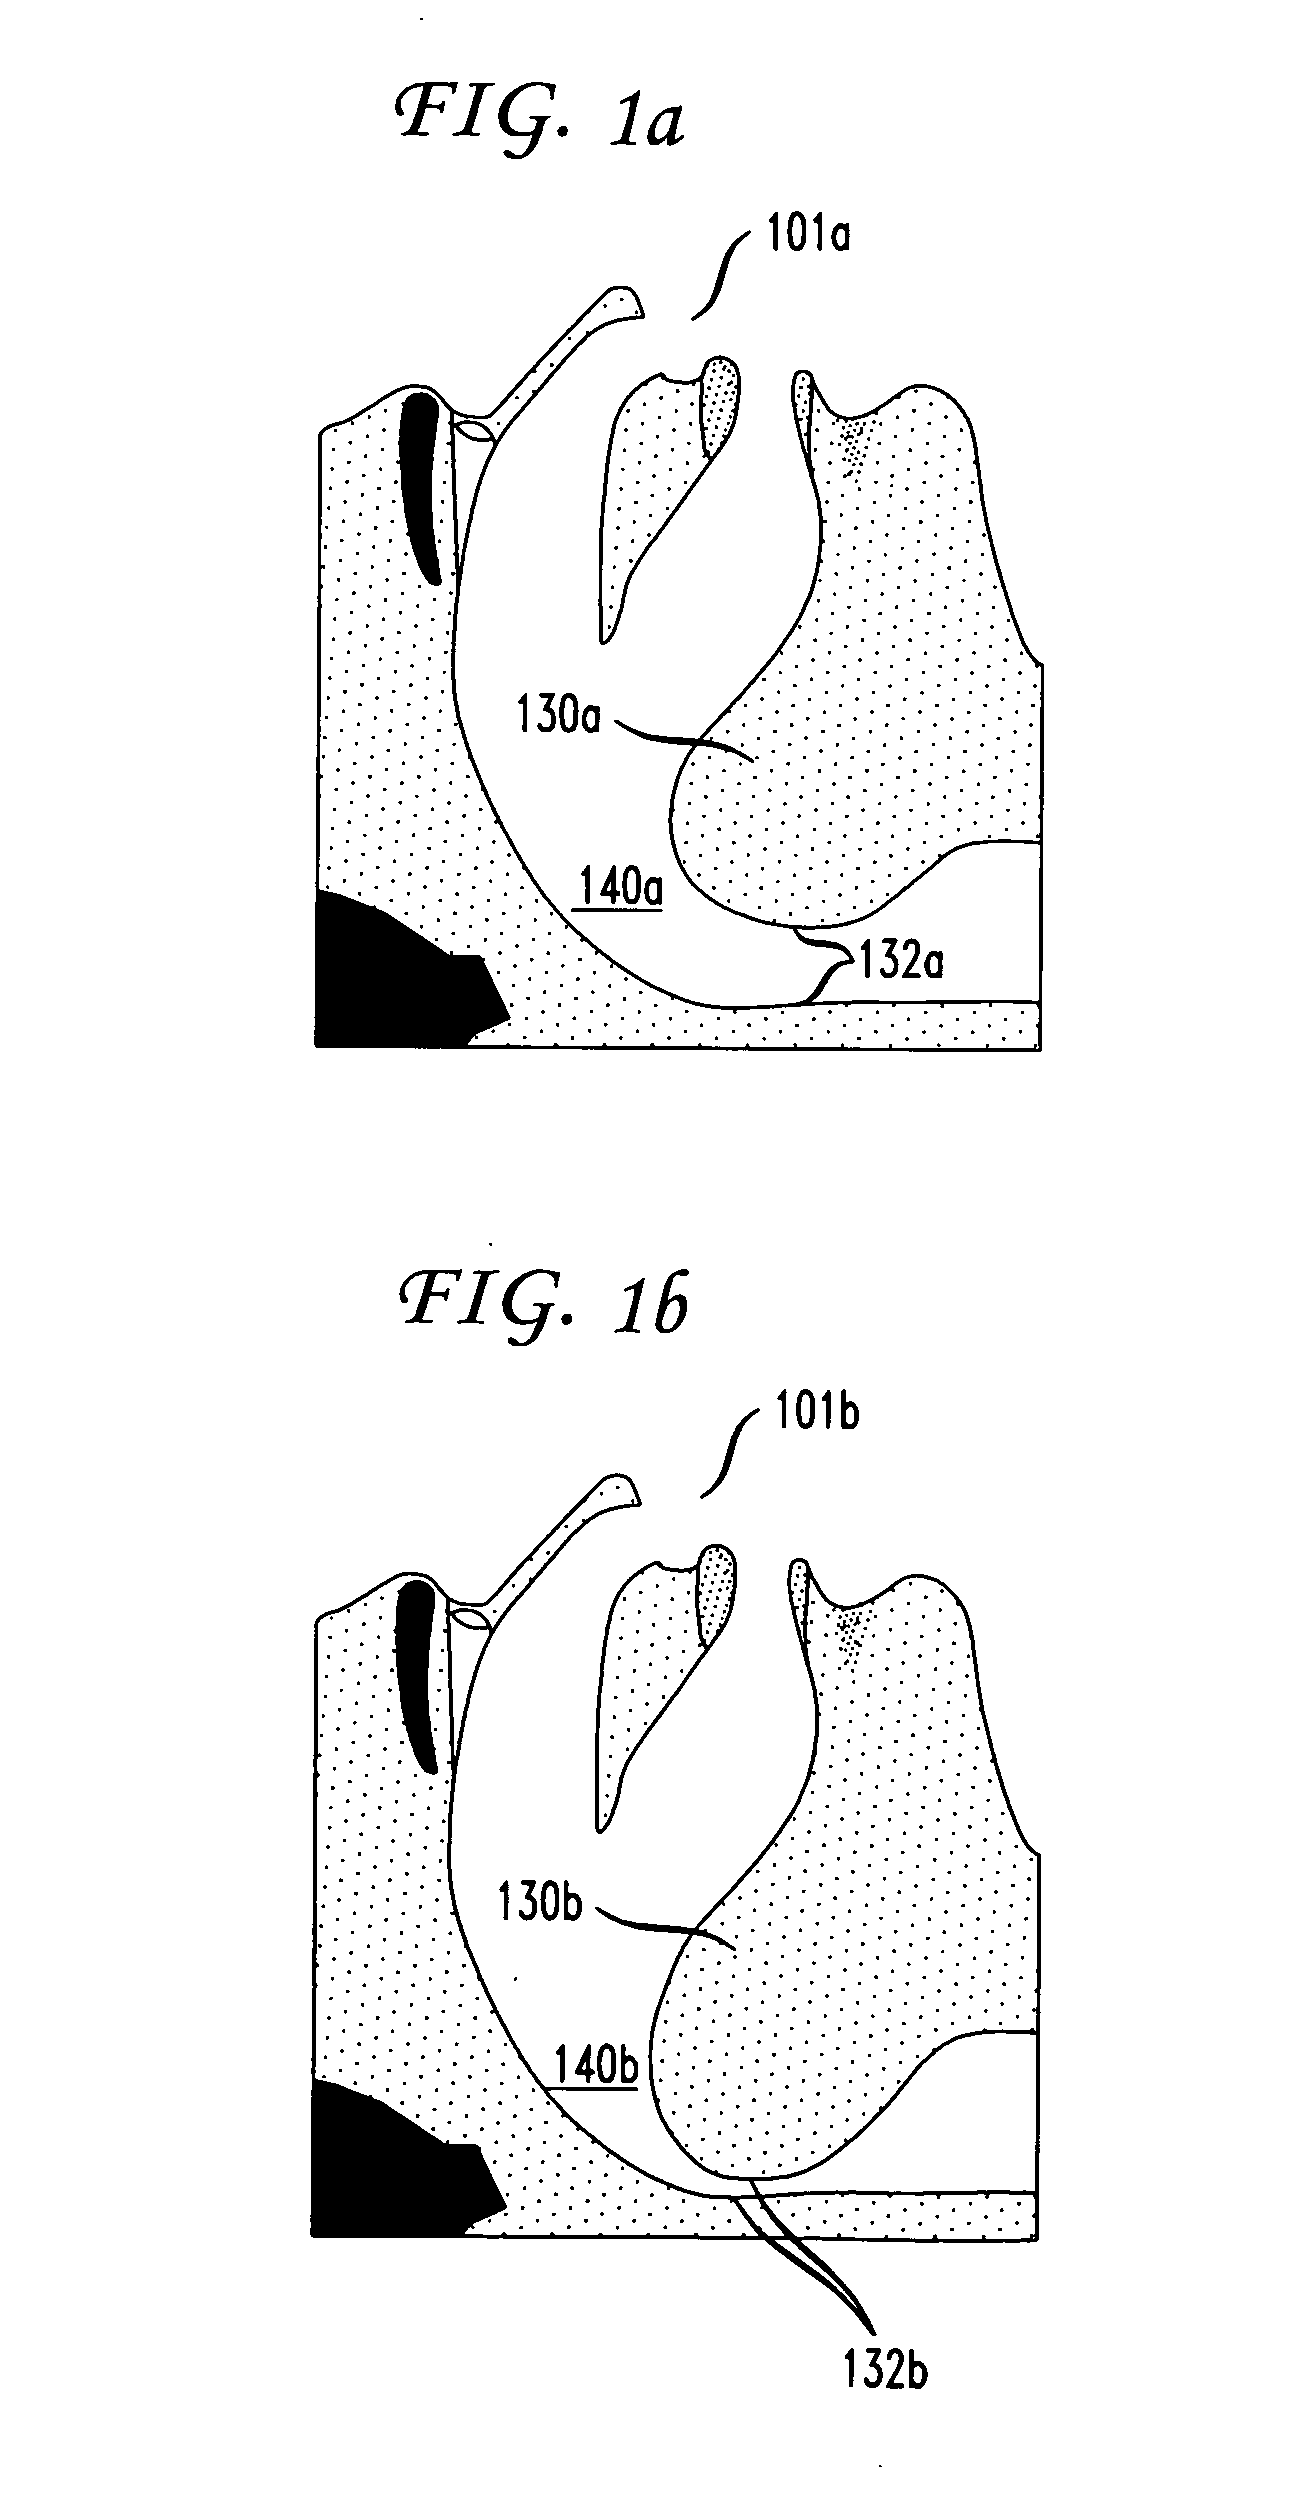 Methods and devices for treatment of obstructive sleep apnea